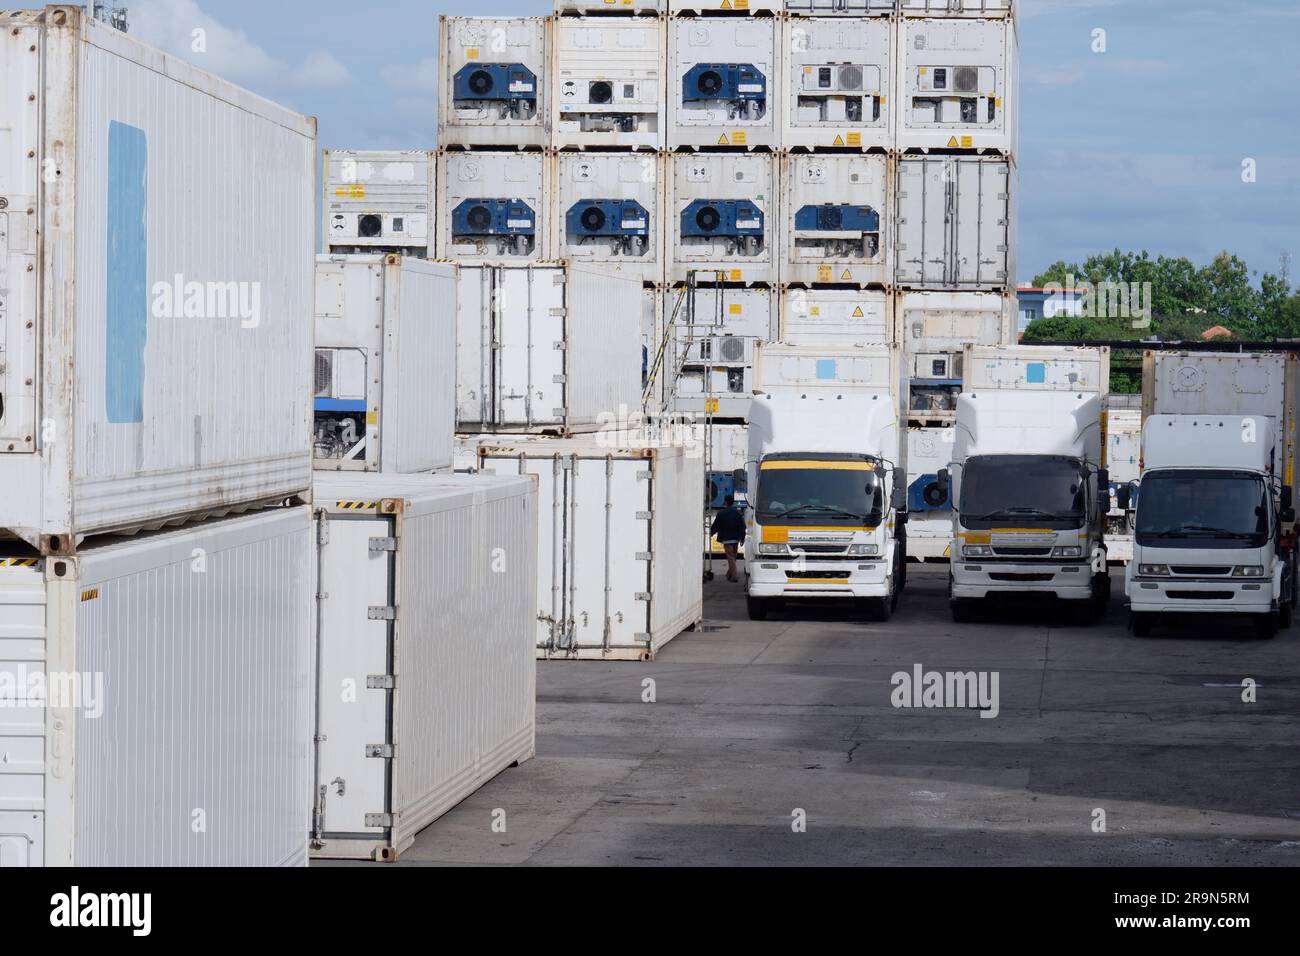 trucks in refrigerated container areas Stock Photo